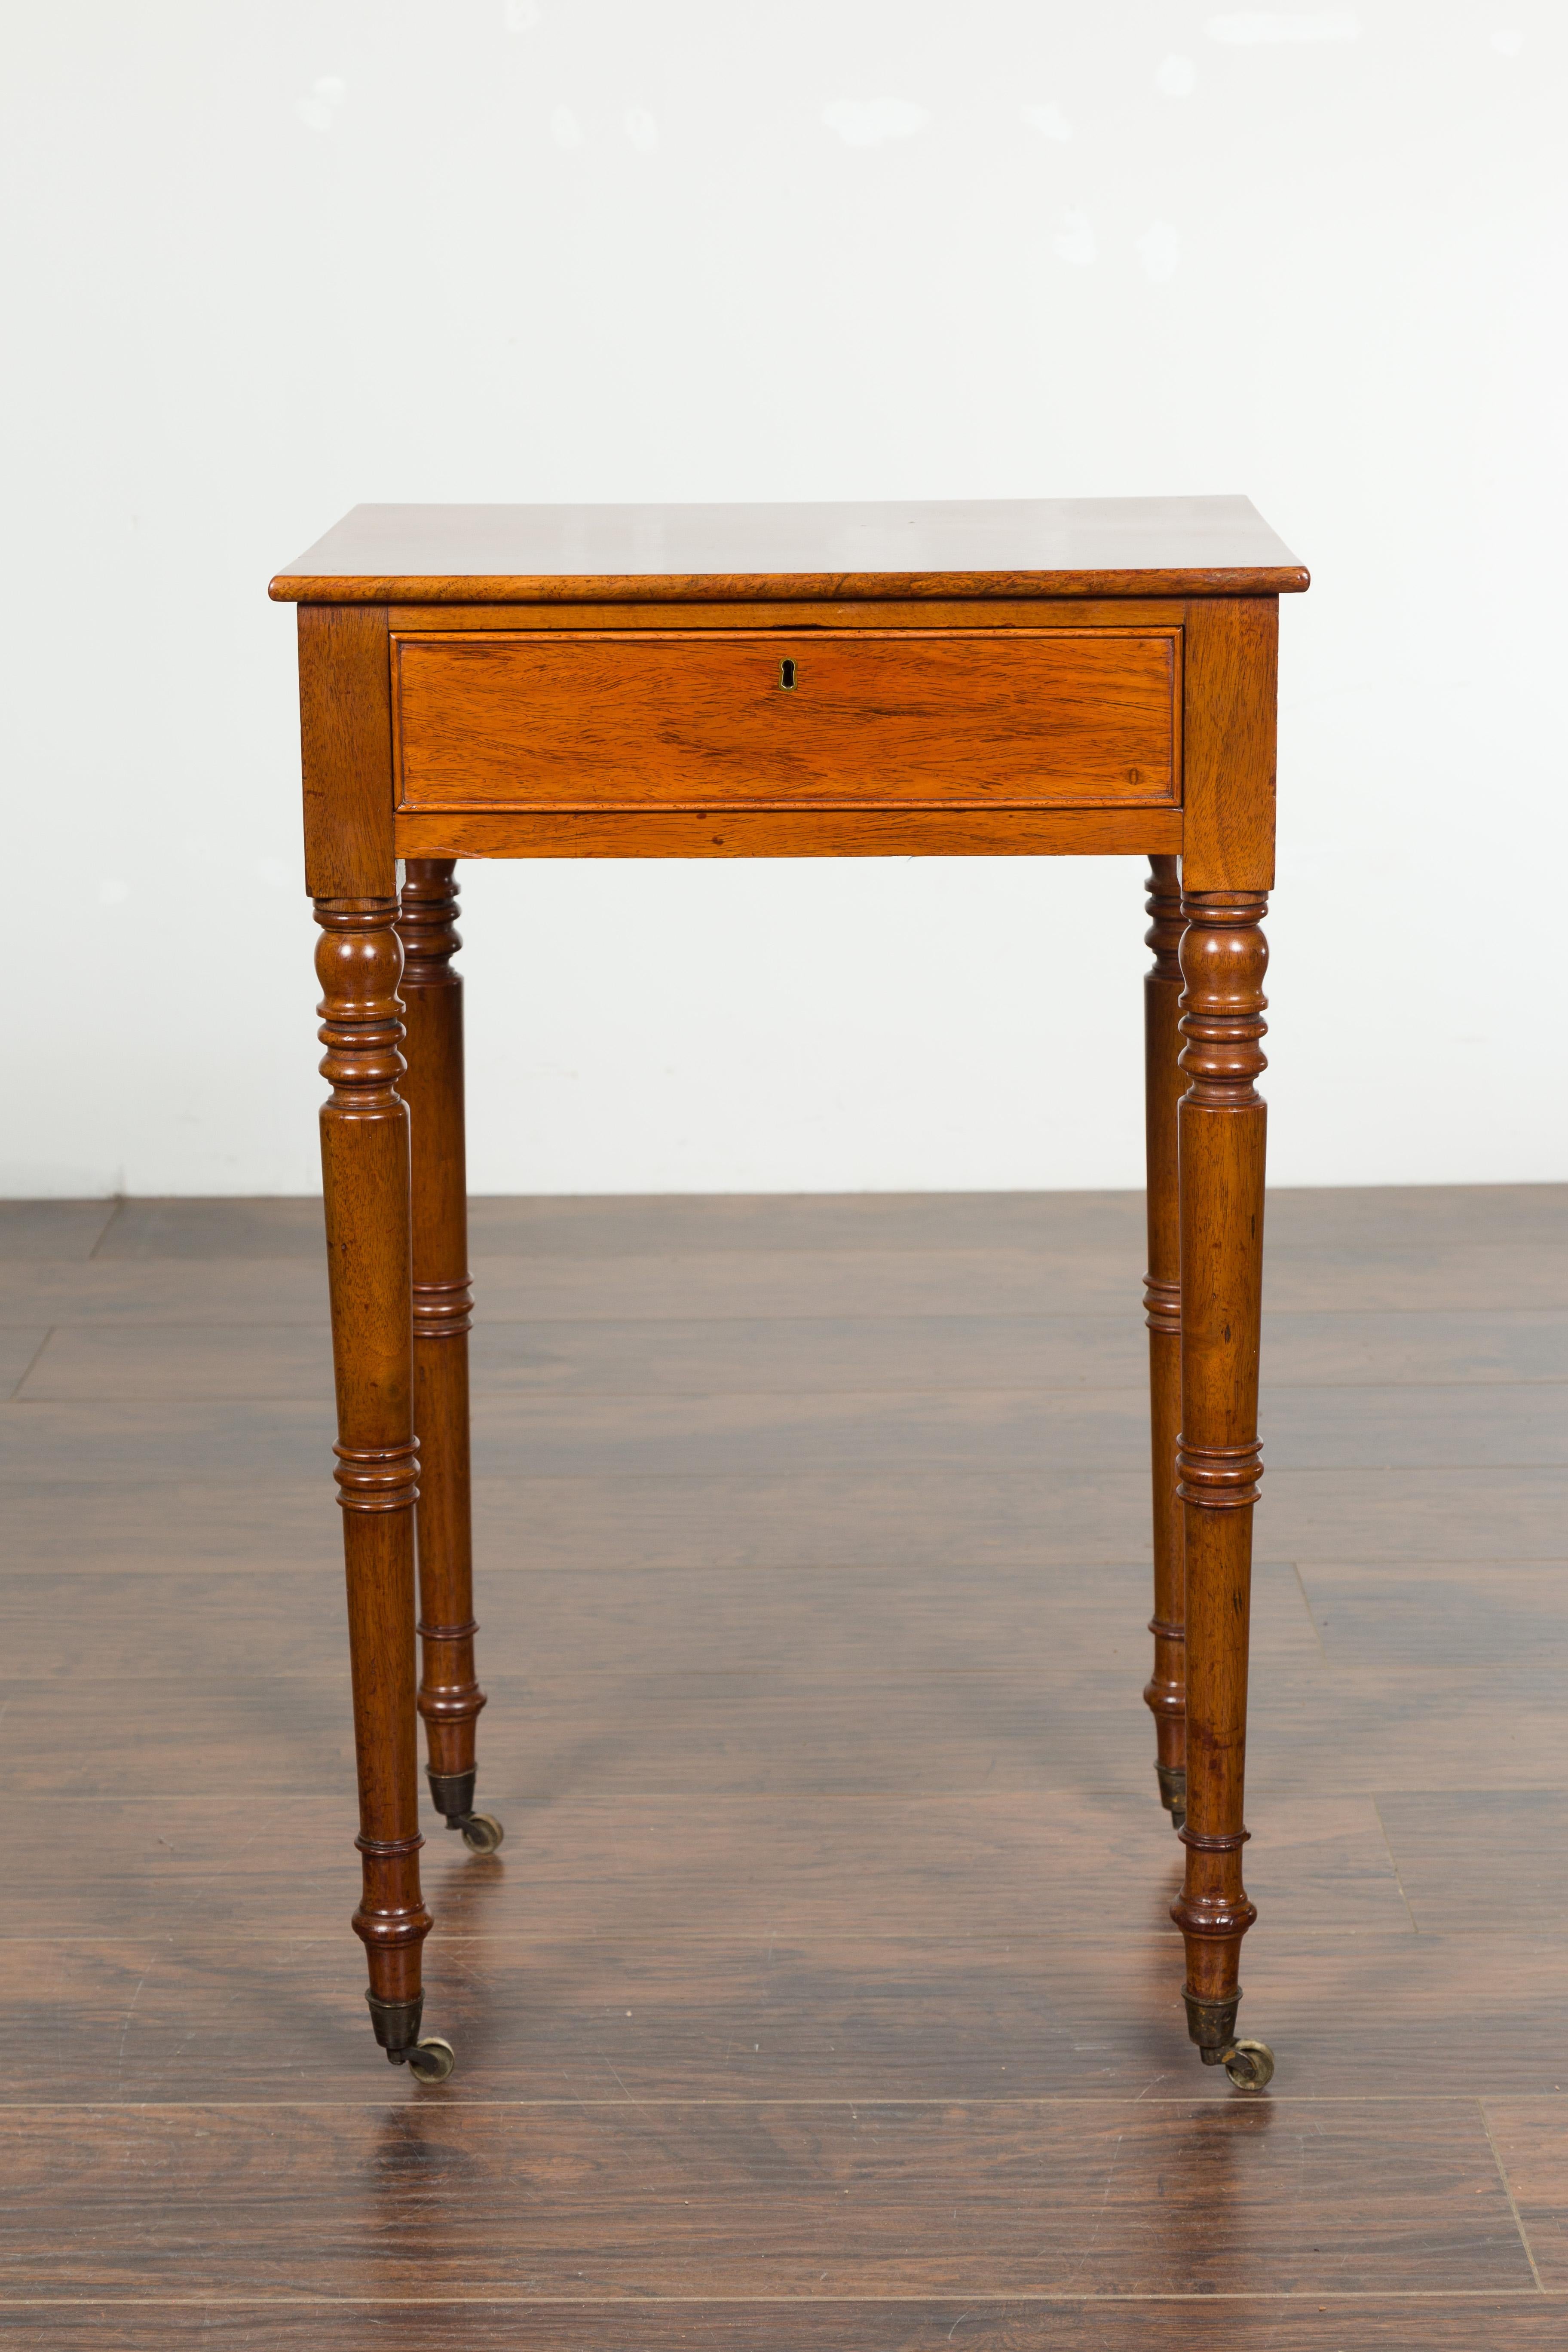 19th Century English 1820s Walnut Side Table with Single Drawer, Turned Legs and Casters For Sale